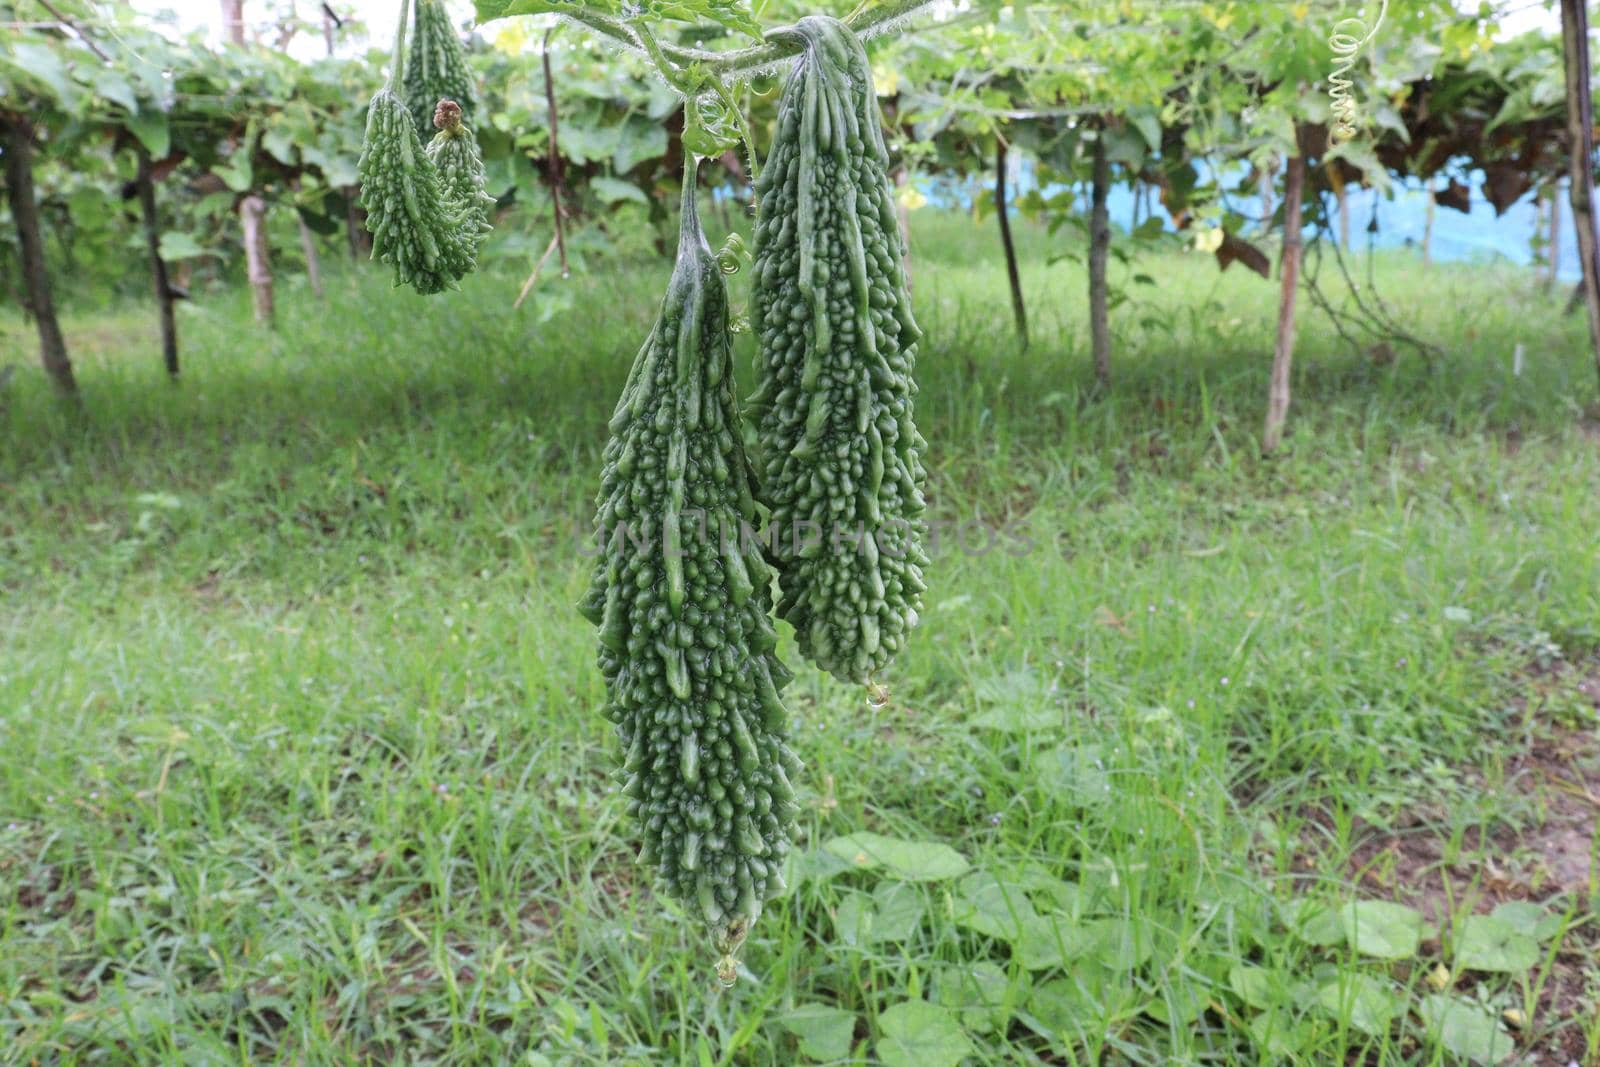 healthy raw bitter melon on tree in farm for harvest